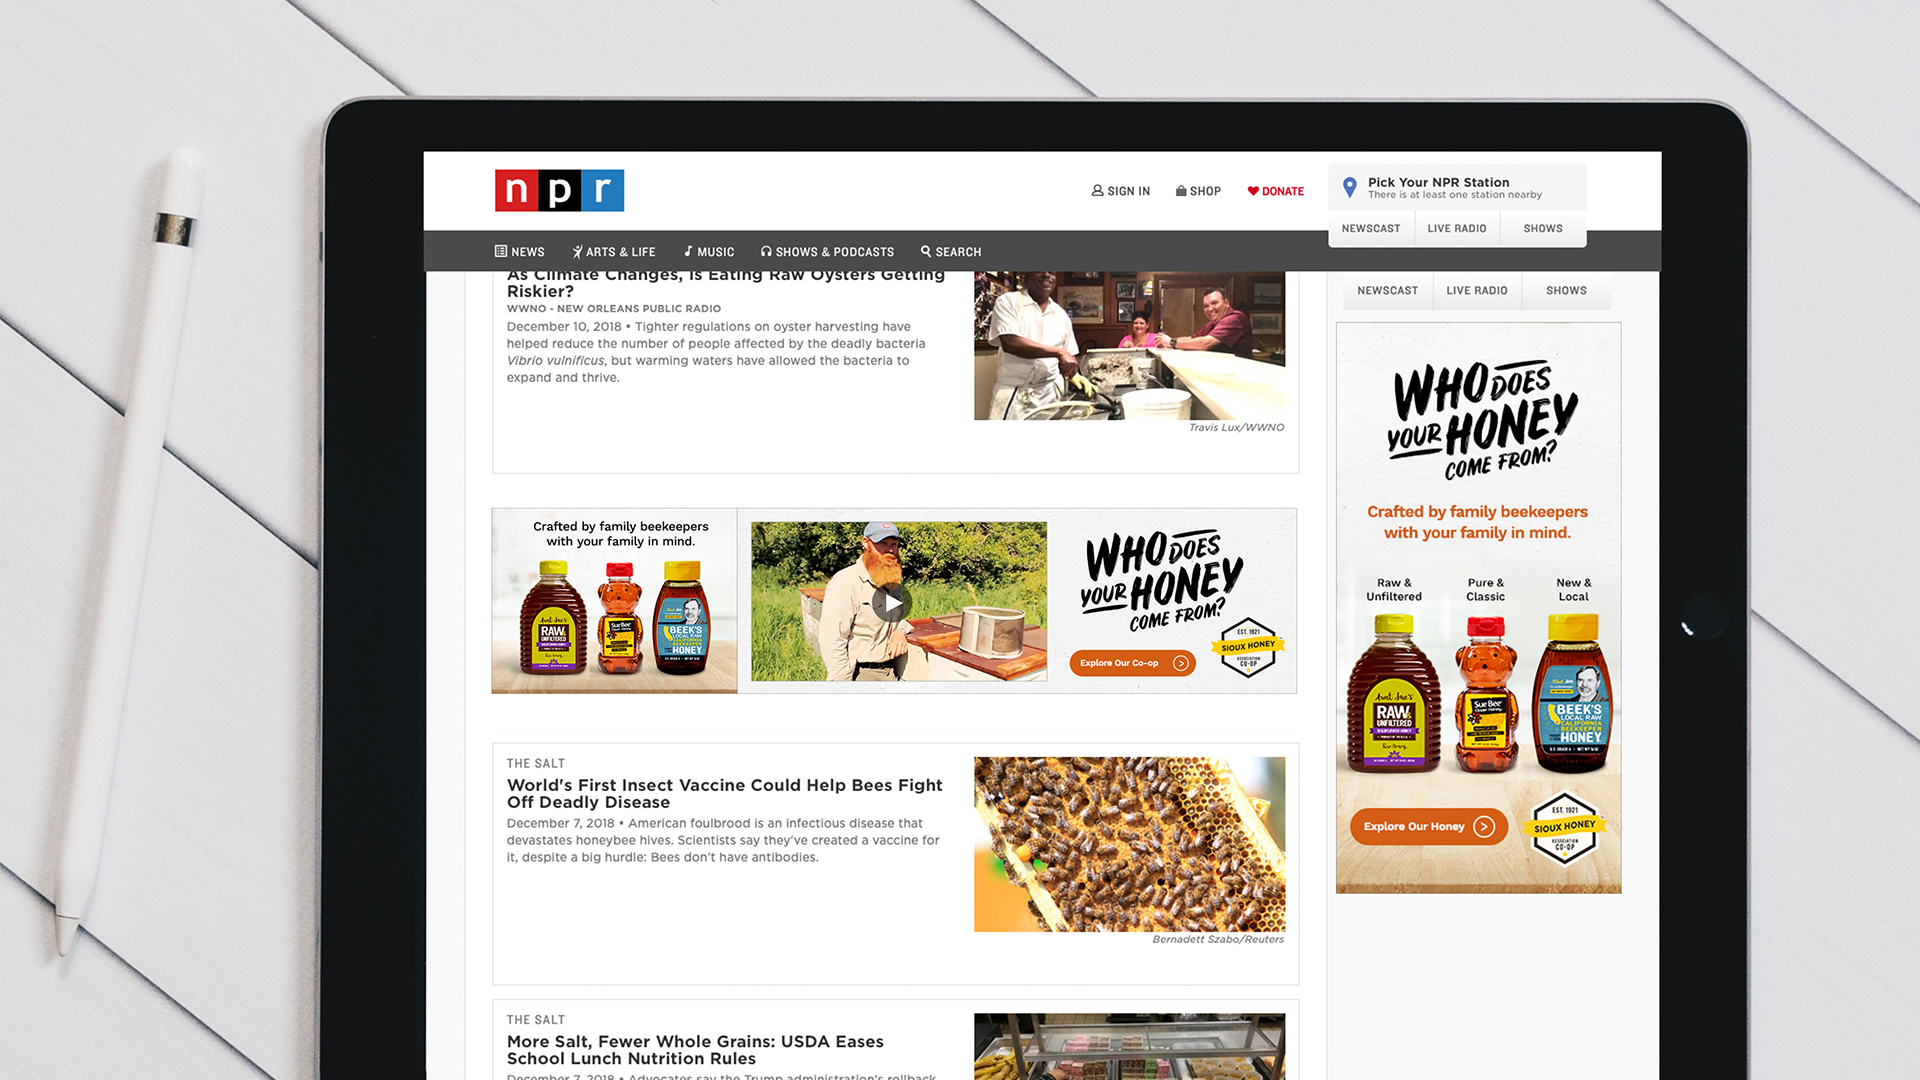 Sioux Honey Association Co-op Who Does Your Honey Come From Banner Ad